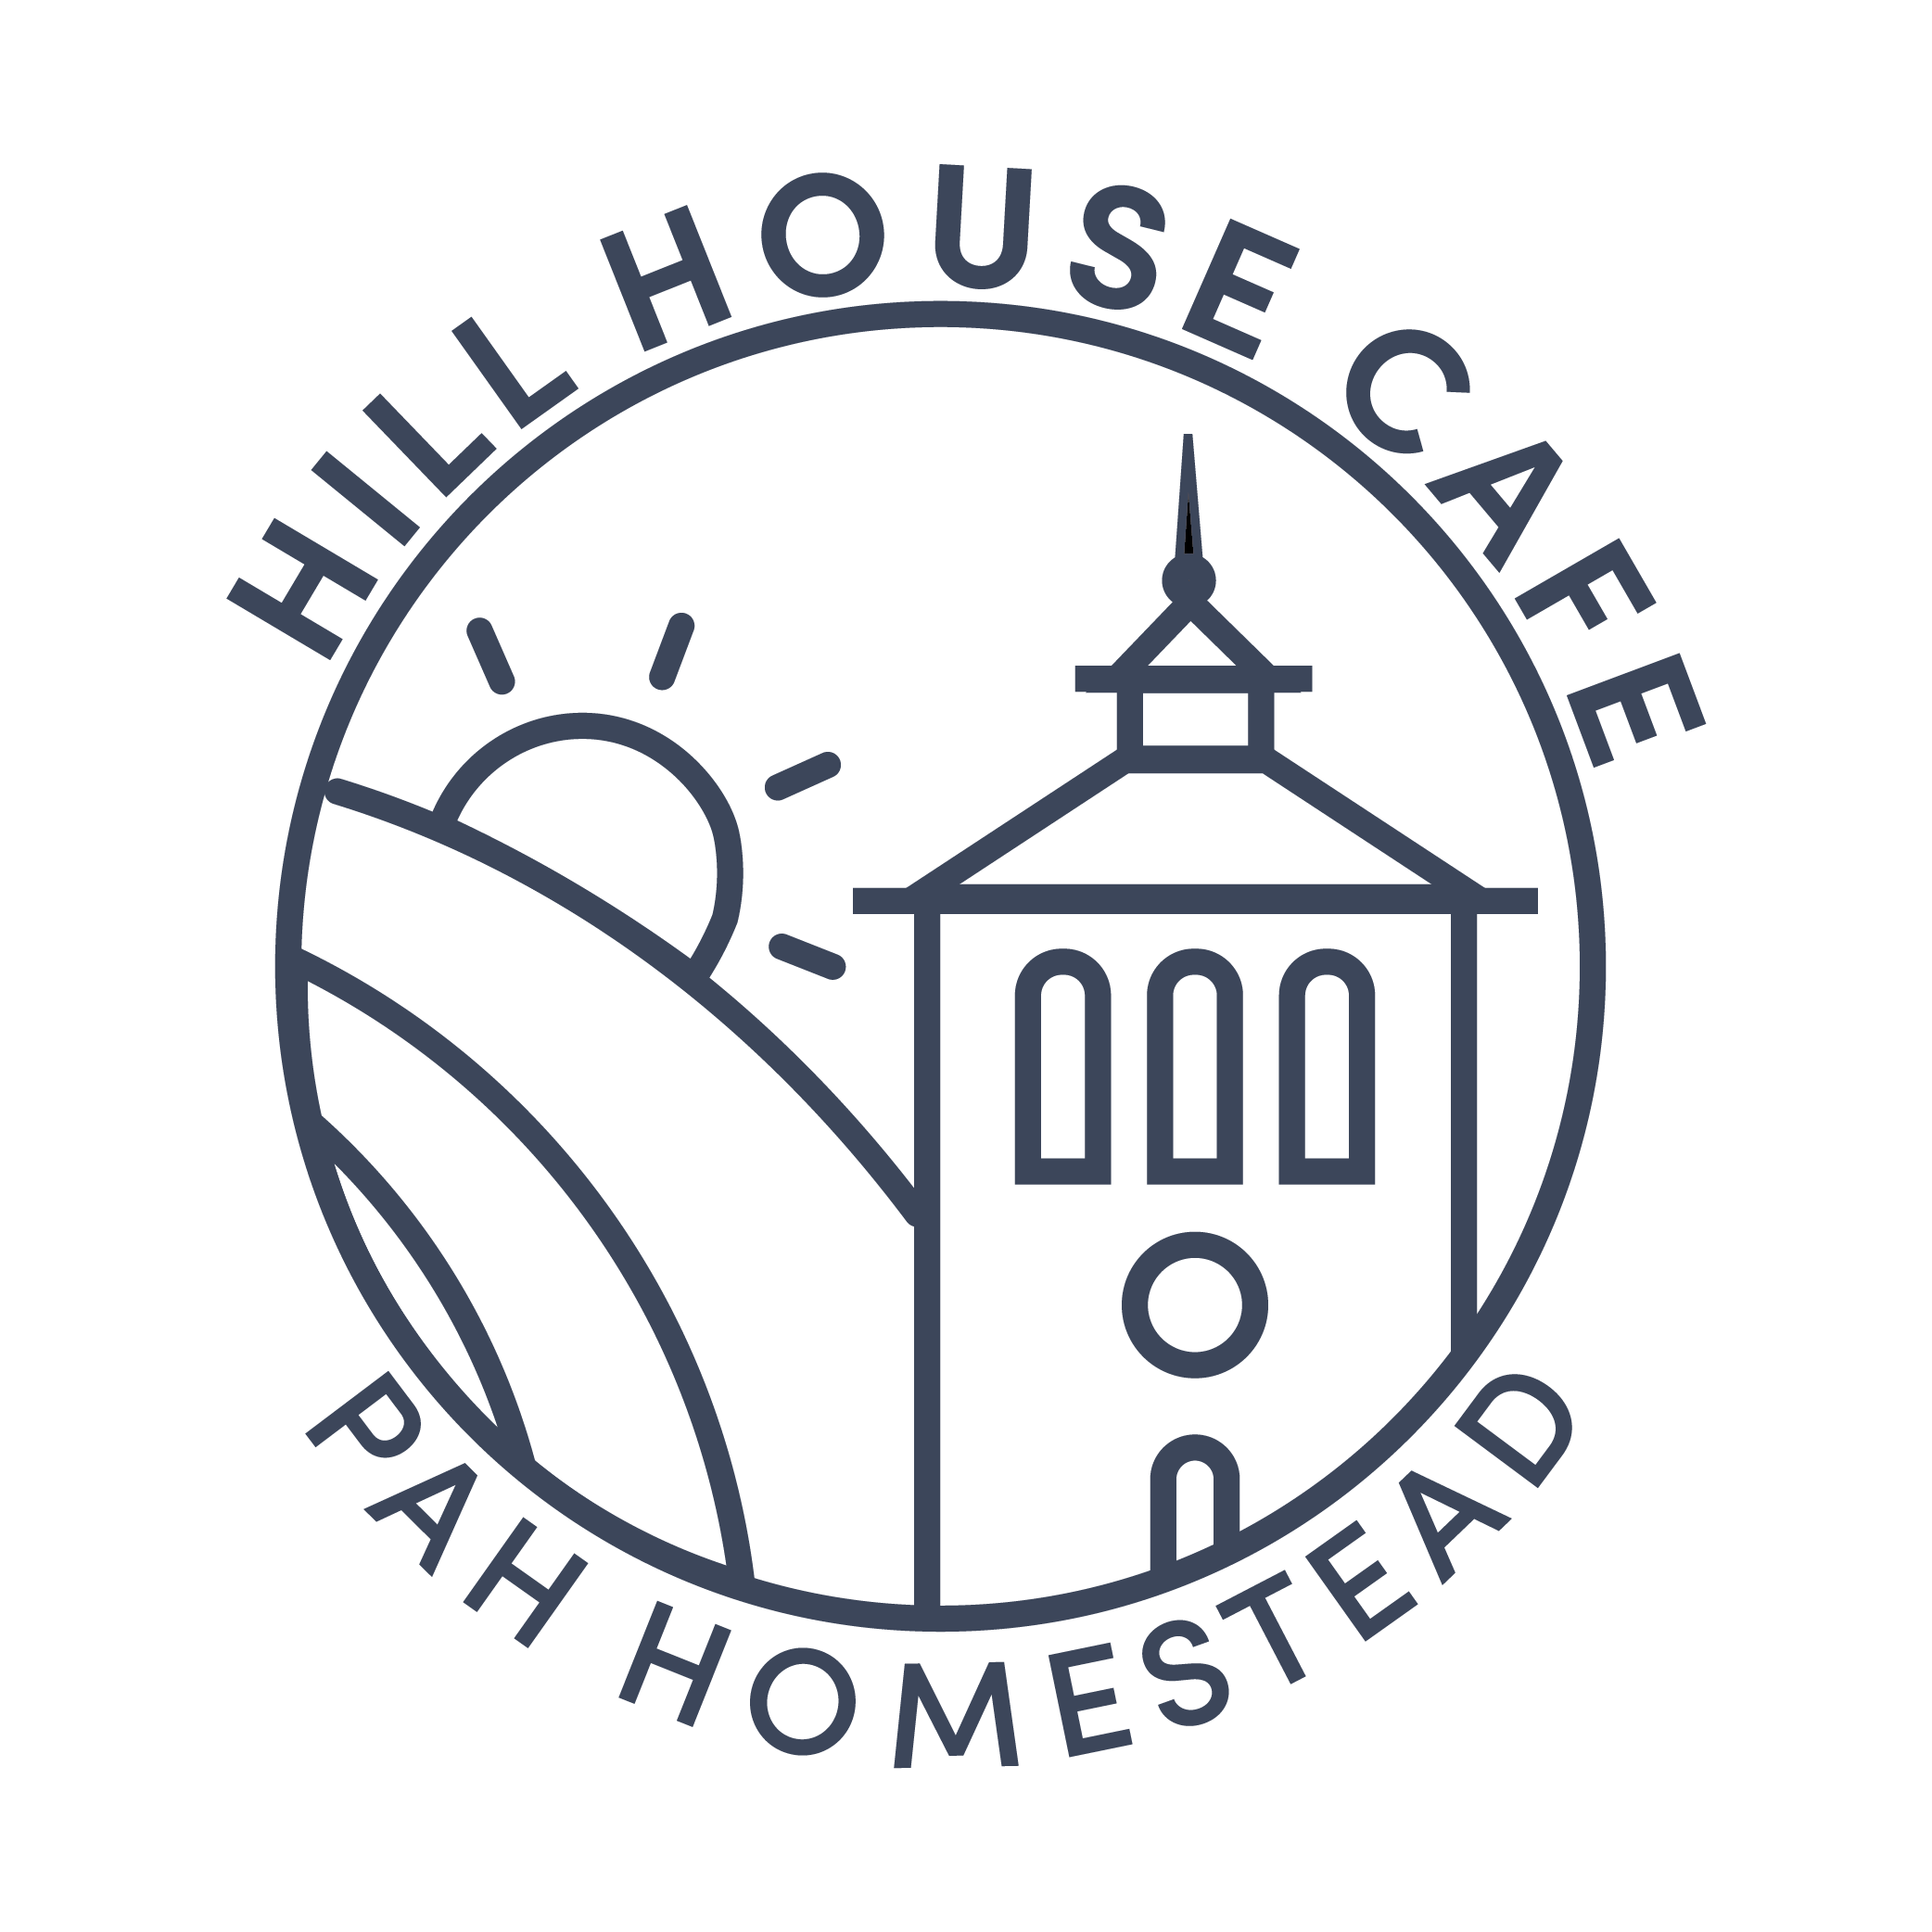 Hill House Cafe